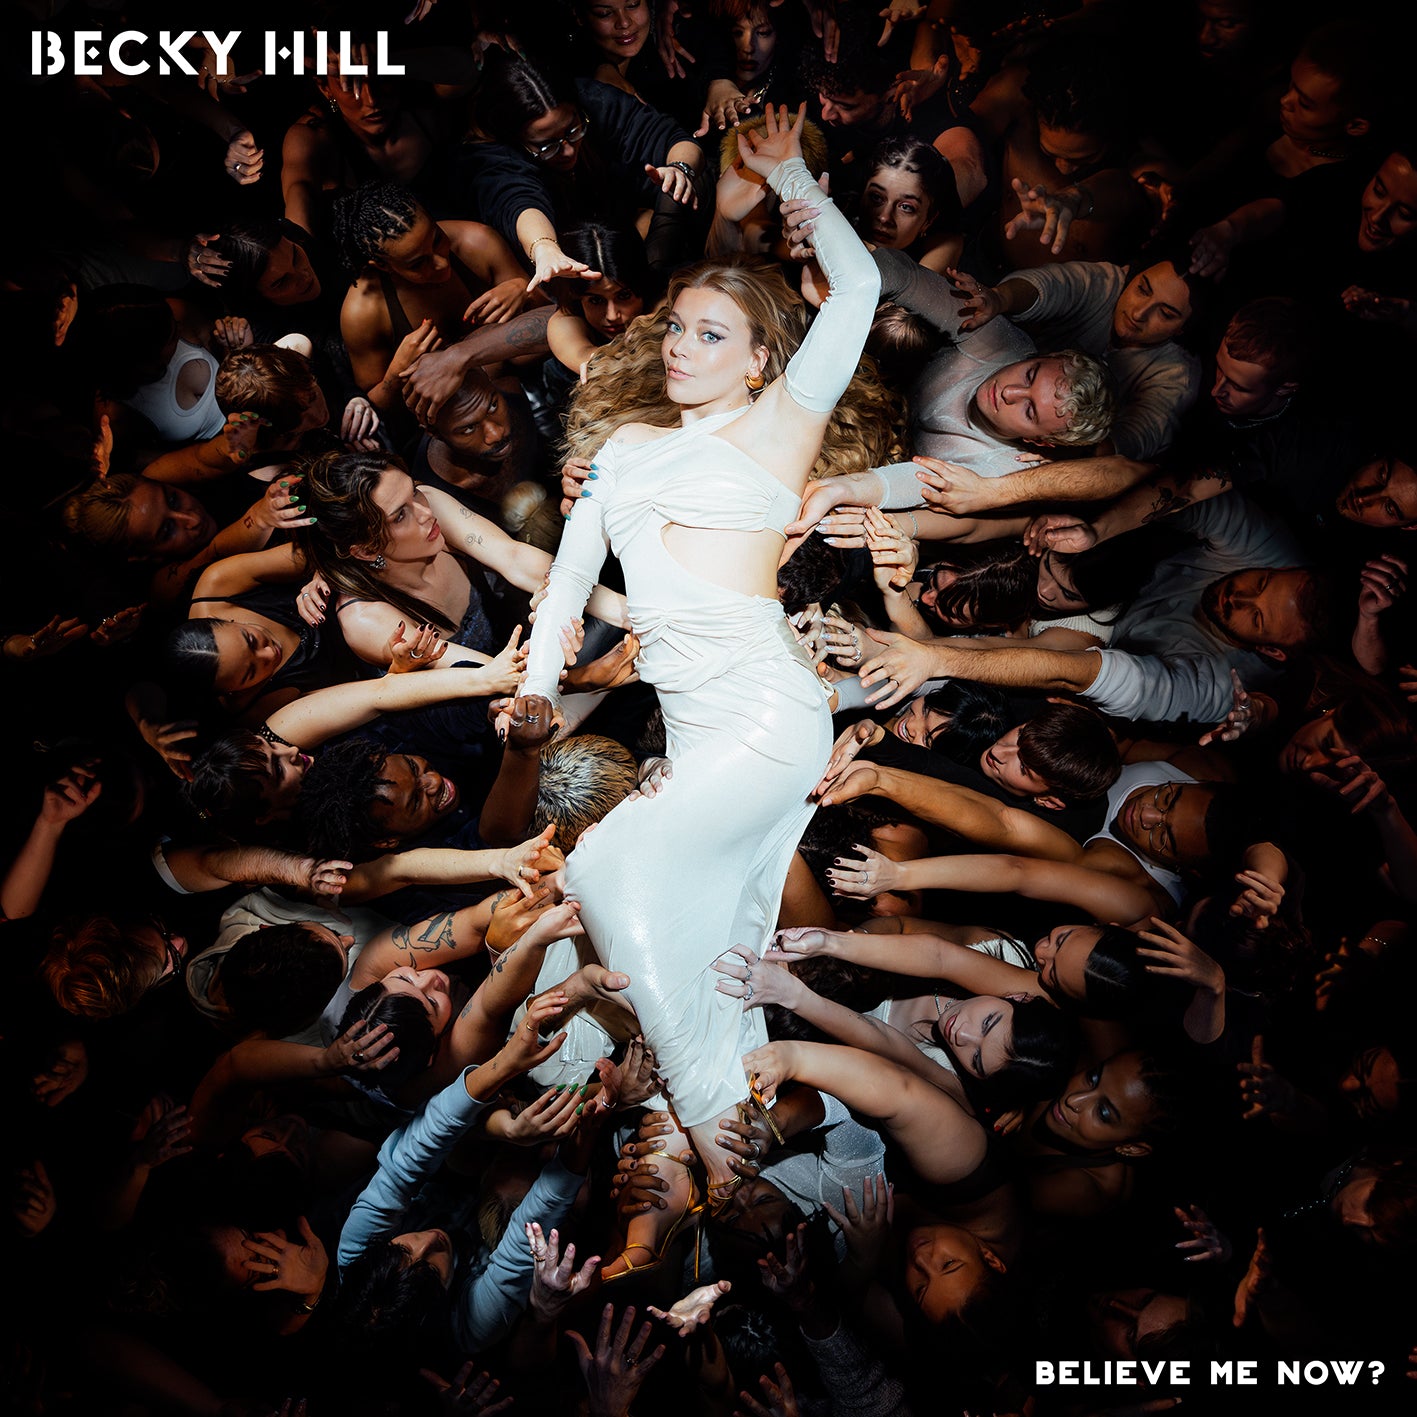 Becky Hill - Believe Me Now? | Buy the Vinyl LP from Flying Nun Records